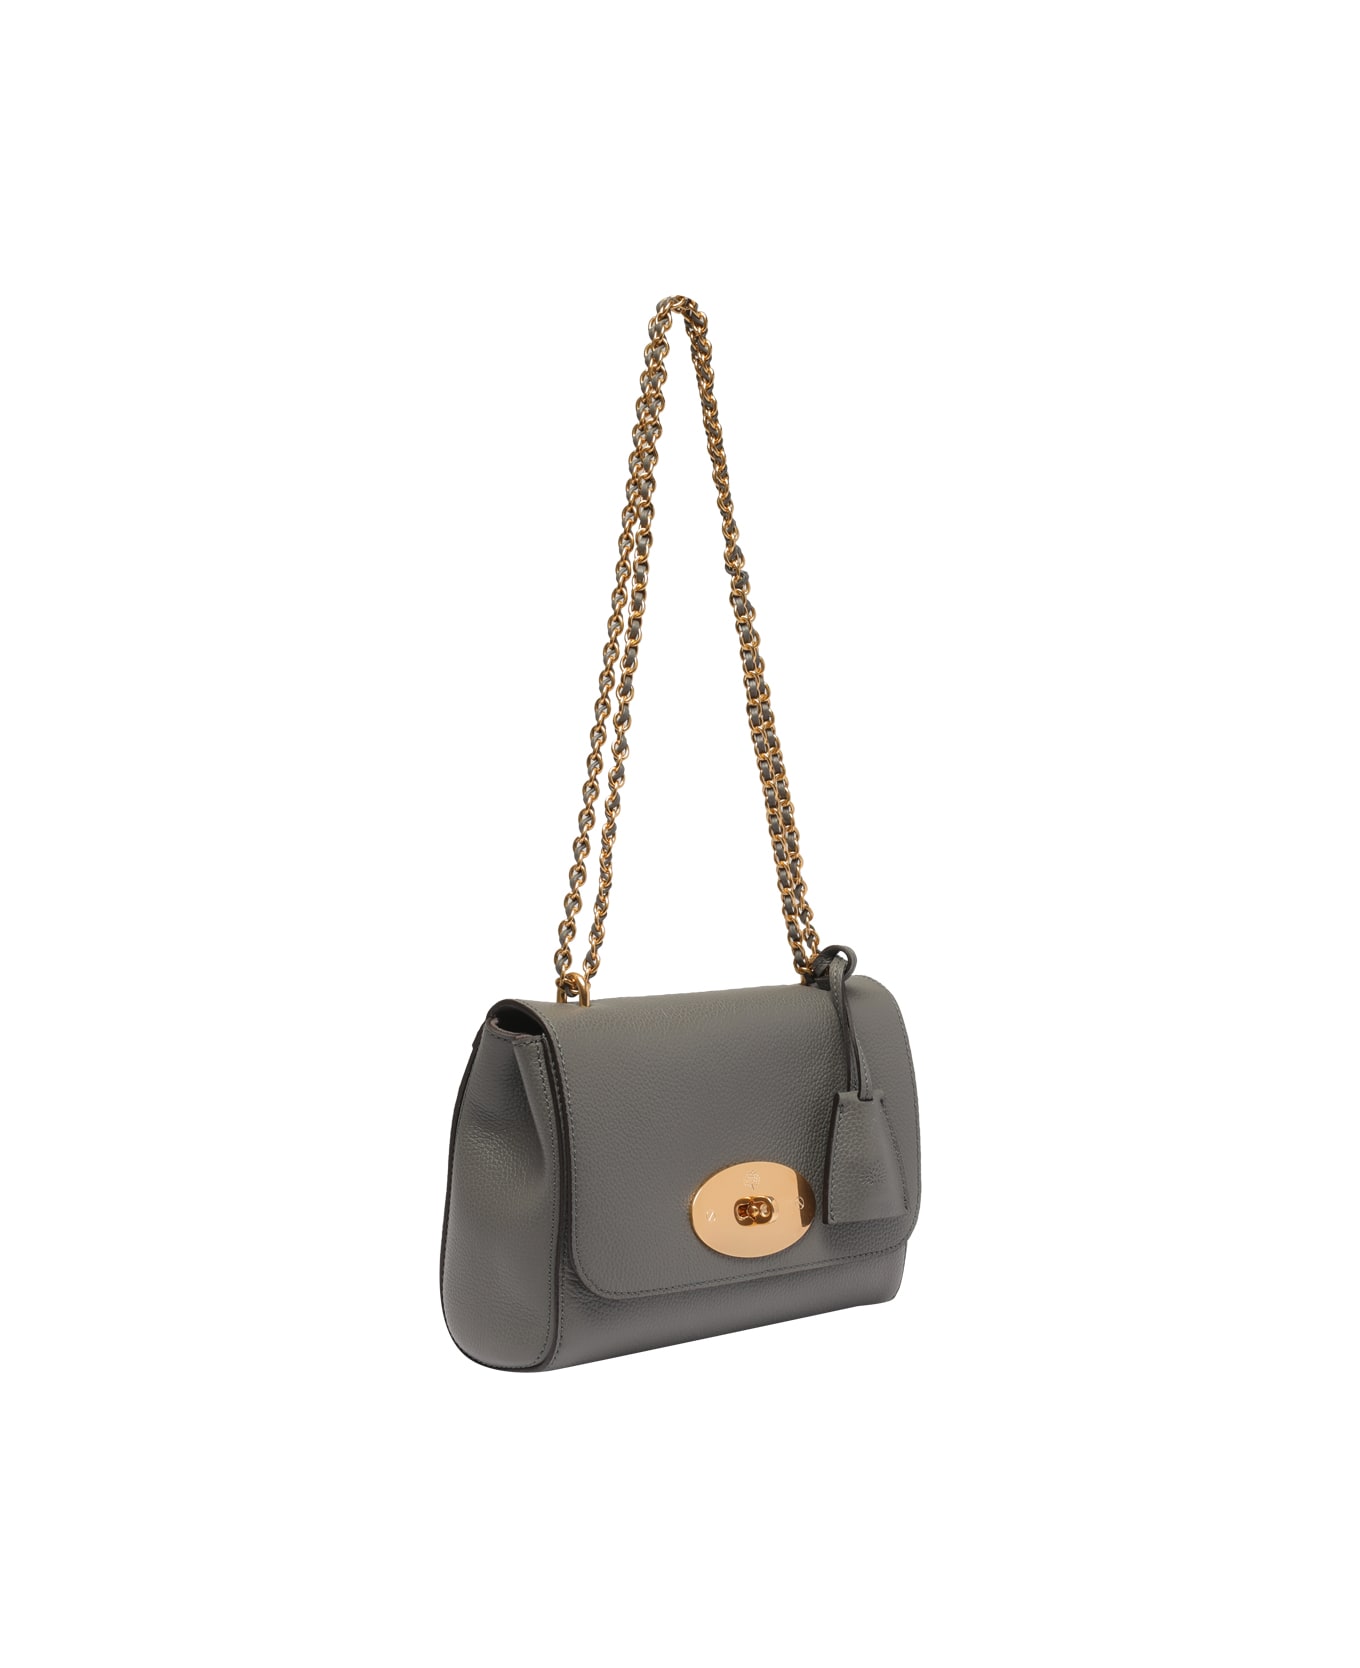 Mulberry Small Lily Shoulder Bag - Grey